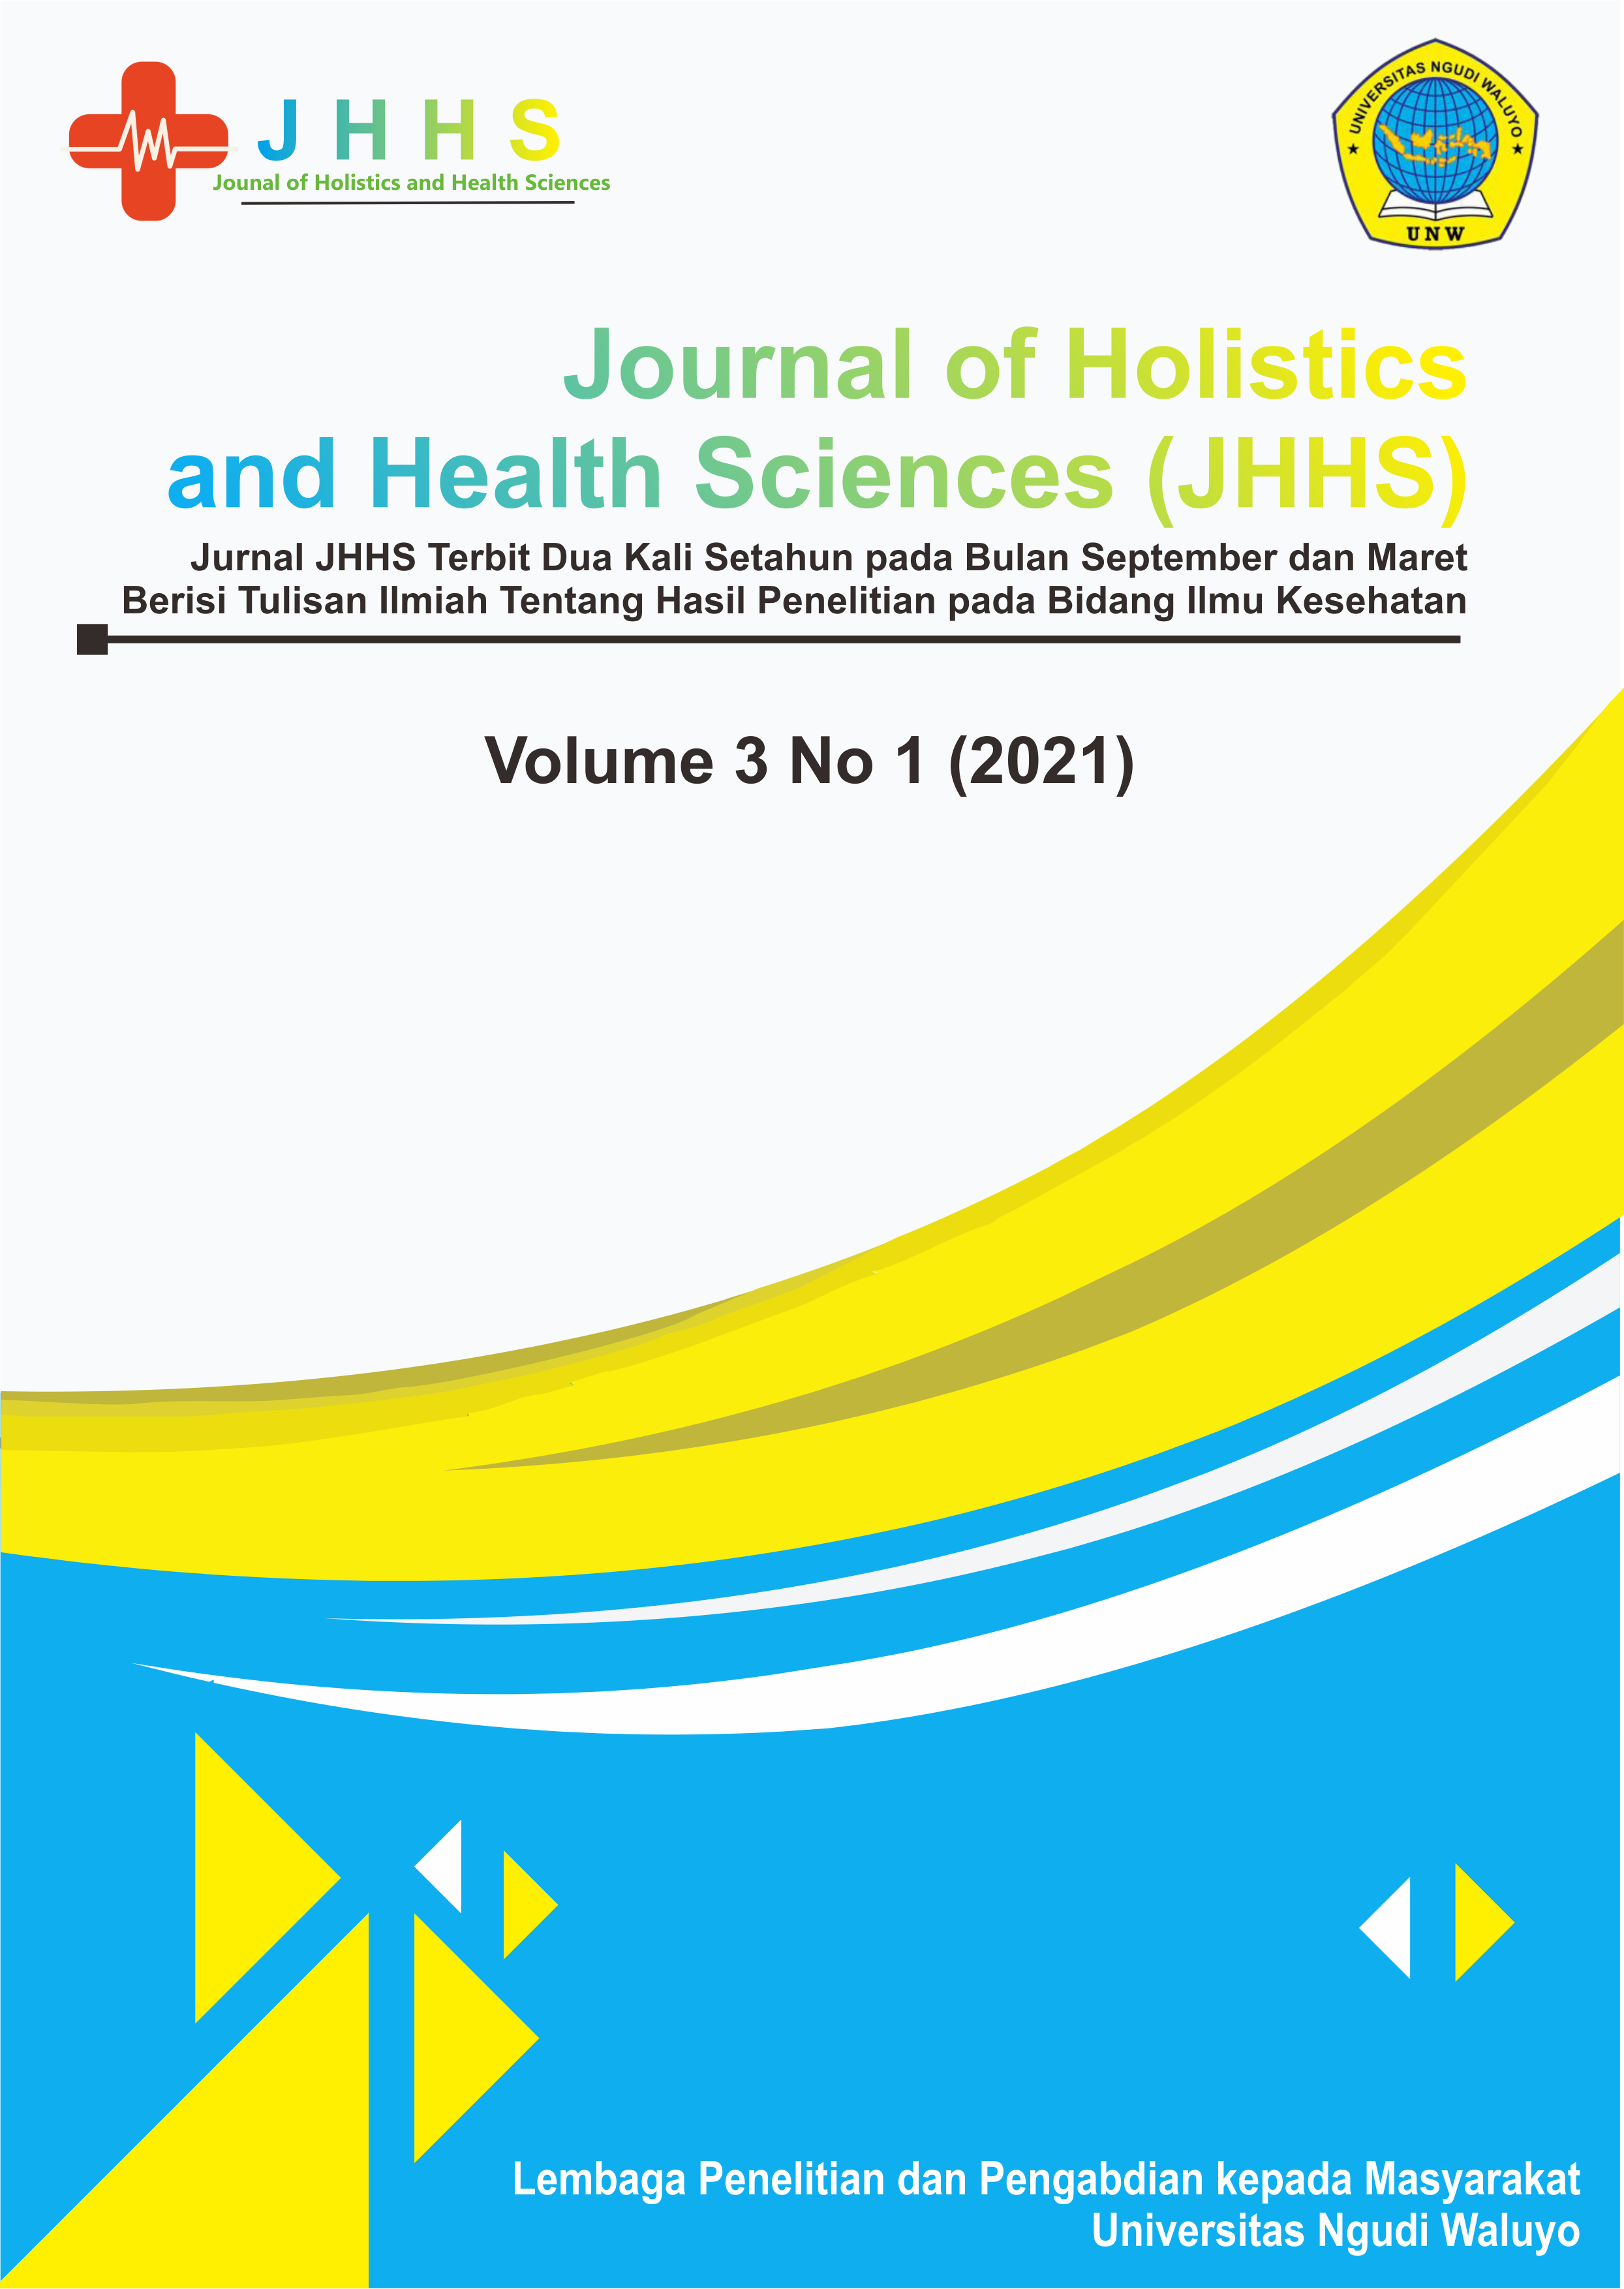 					View Vol. 3 No. 1 (2021): Journal of Holistics and Health Science (JHHS), Maret
				